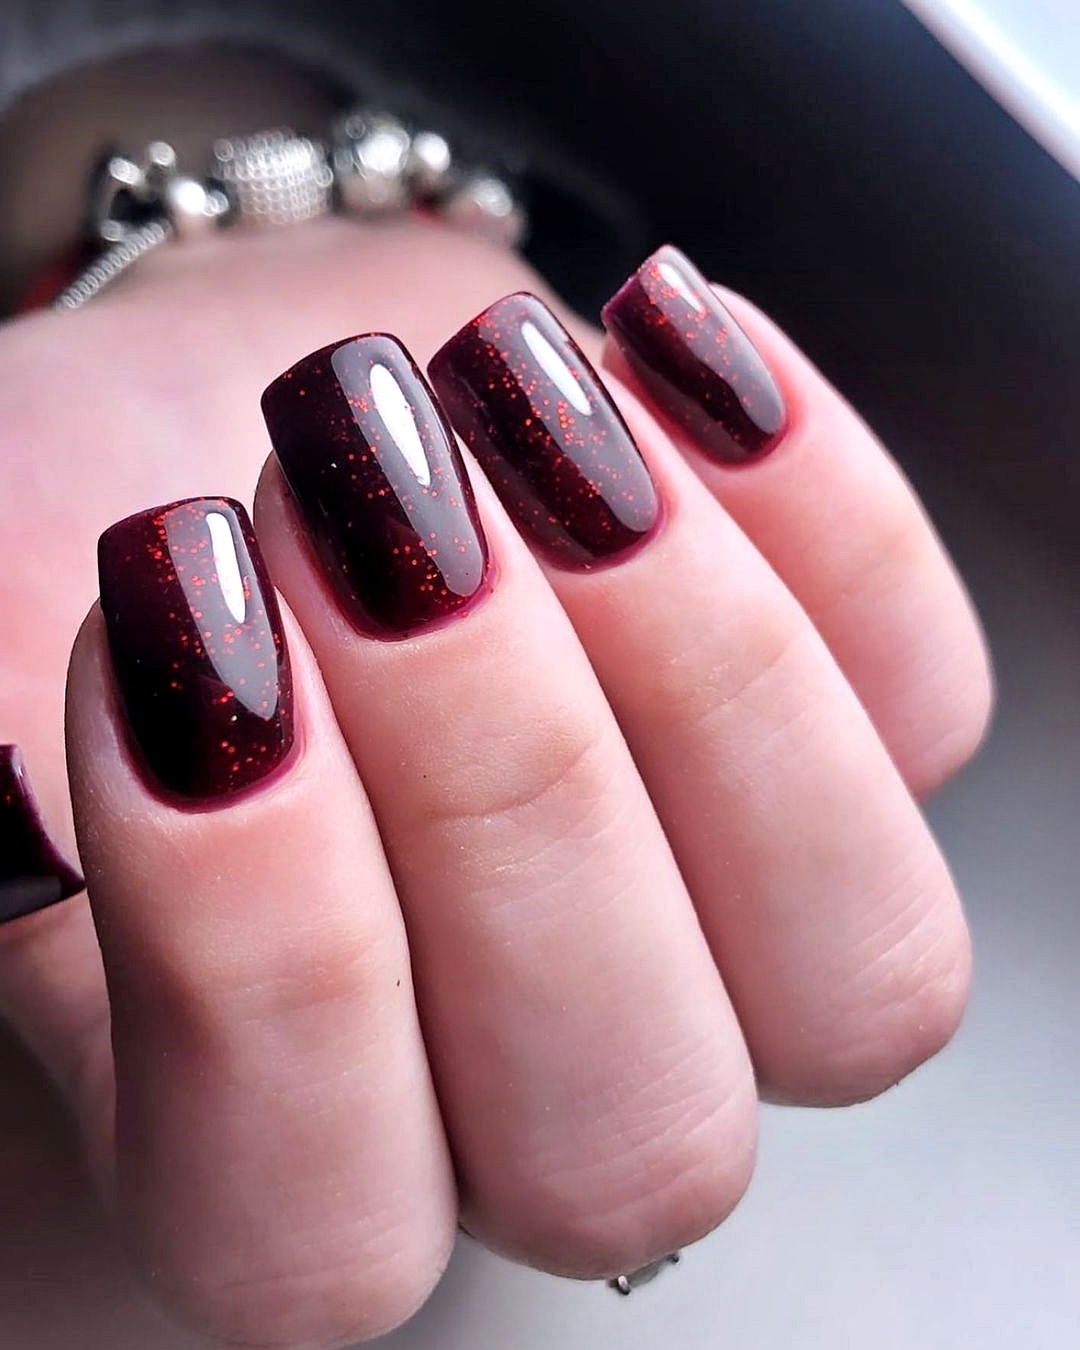 What color nail polish is trending now?